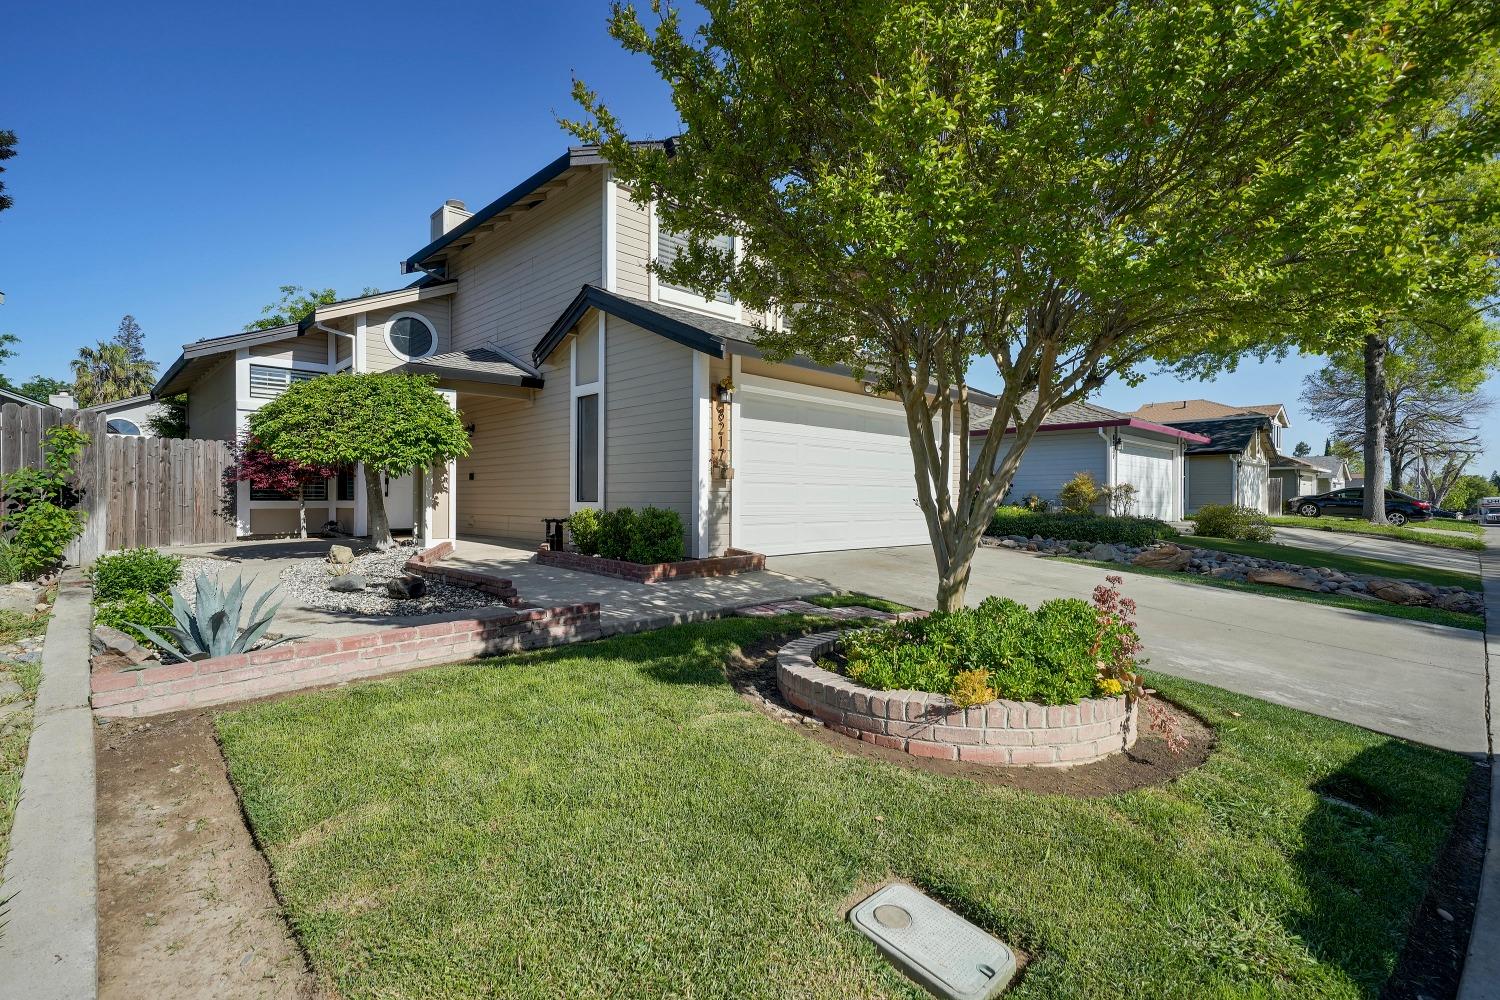 Photo of 8217 Northam Dr in Antelope, CA